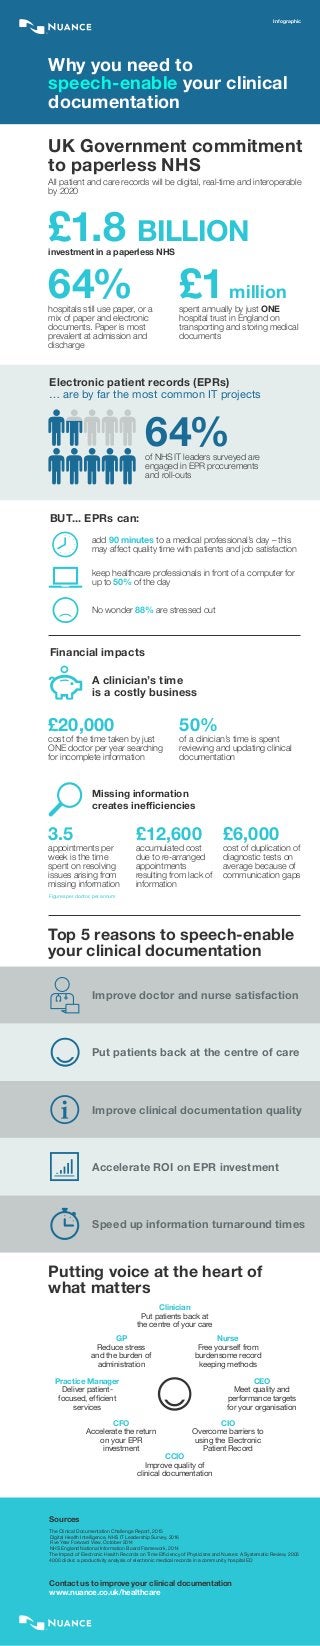 Infographic
Sources
The Clinical Documentation Challenge Report, 2015
Digital Health Intelligence, NHS IT Leadership Survey, 2016
Five Year Forward View, October 2014
NHS England National Information Board Framework, 2014
The Impact of Electronic Health Records on Time Efficiency of Physicians and Nurses: A Systematic Review, 2005
4000 clicks: a productivity analysis of electronic medical records in a community hospital ED
Contact us to improve your clinical documentation
www.nuance.co.uk/healthcare
Electronic patient records (EPRs)
	… are by far the most common IT projects
BUT... EPRs can:
Financial impacts
Missing information
creates inefficiencies
Why you need to
speech-enable your clinical
documentation
UK Government commitment
to paperless NHS
All patient and care records will be digital, real-time and interoperable
by 2020
£1.8 billioninvestment in a paperless NHS
64%hospitals still use paper, or a
mix of paper and electronic
documents. Paper is most
prevalent at admission and
discharge
£1million
spent annually by just ONE
hospital trust in England on
transporting and storing medical
documents
64%of NHS IT leaders surveyed are
engaged in EPR procurements
and roll-outs
add 90 minutes to a medical professional’s day – this
may affect quality time with patients and job satisfaction
keep healthcare professionals in front of a computer for
up to 50% of the day
No wonder 88% are stressed out
A clinician’s time
is a costly business
£20,000
cost of the time taken by just
ONE doctor per year searching
for incomplete information
3.5
appointments per
week is the time
spent on resolving
issues arising from
missing information
£12,600
accumulated cost
due to re-arranged
appointments
resulting from lack of
information
£6,000
cost of duplication of
diagnostic tests on
average because of
communication gaps
50%
of a clinician’s time is spent
reviewing and updating clinical
documentation
Top 5 reasons to speech-enable
your clinical documentation
Improve doctor and nurse satisfaction
Improve clinical documentation quality
Speed up information turnaround times
Put patients back at the centre of care
Accelerate ROI on EPR investment
Putting voice at the heart of
what matters
Clinician
Put patients back at
the centre of your care
CCIO
Improve quality of
clinical documentation
Nurse
Free yourself from
burdensome record
keeping methods
CIO
Overcome barriers to
using the Electronic
Patient Record
GP
Reduce stress
and the burden of
administration
CFO
Accelerate the return
on your EPR
investment
Practice Manager
Deliver patient-
focused, efficient
services
CEO
Meet quality and
performance targets
for your organisation
Figures per doctor, per annum
 